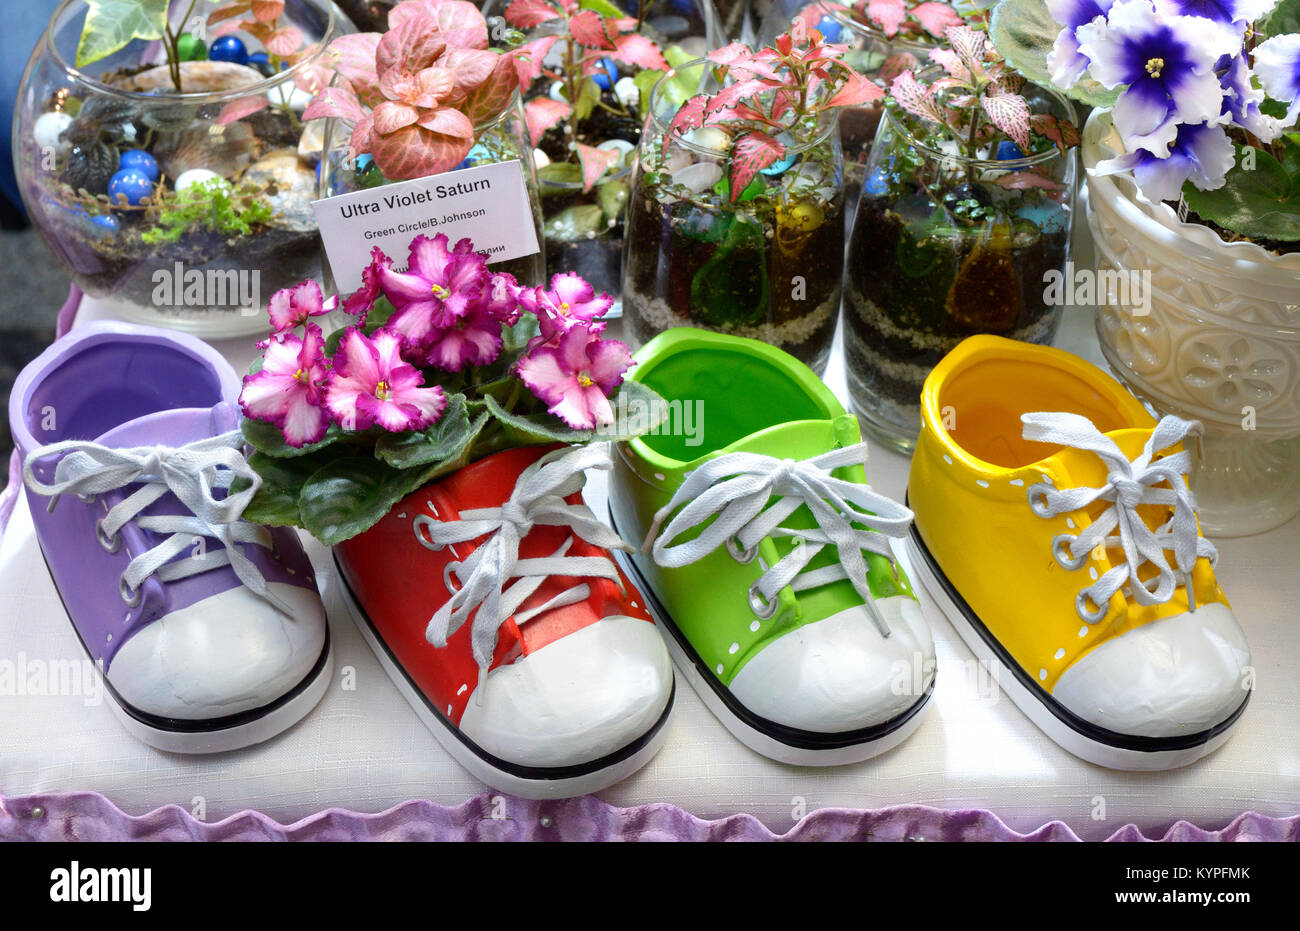 Close-up of baby shoes with ultra violet Saturn in one of them. Festival of violets and flower arranging. January 11,2018. Kiev, Ukraine Stock Photo